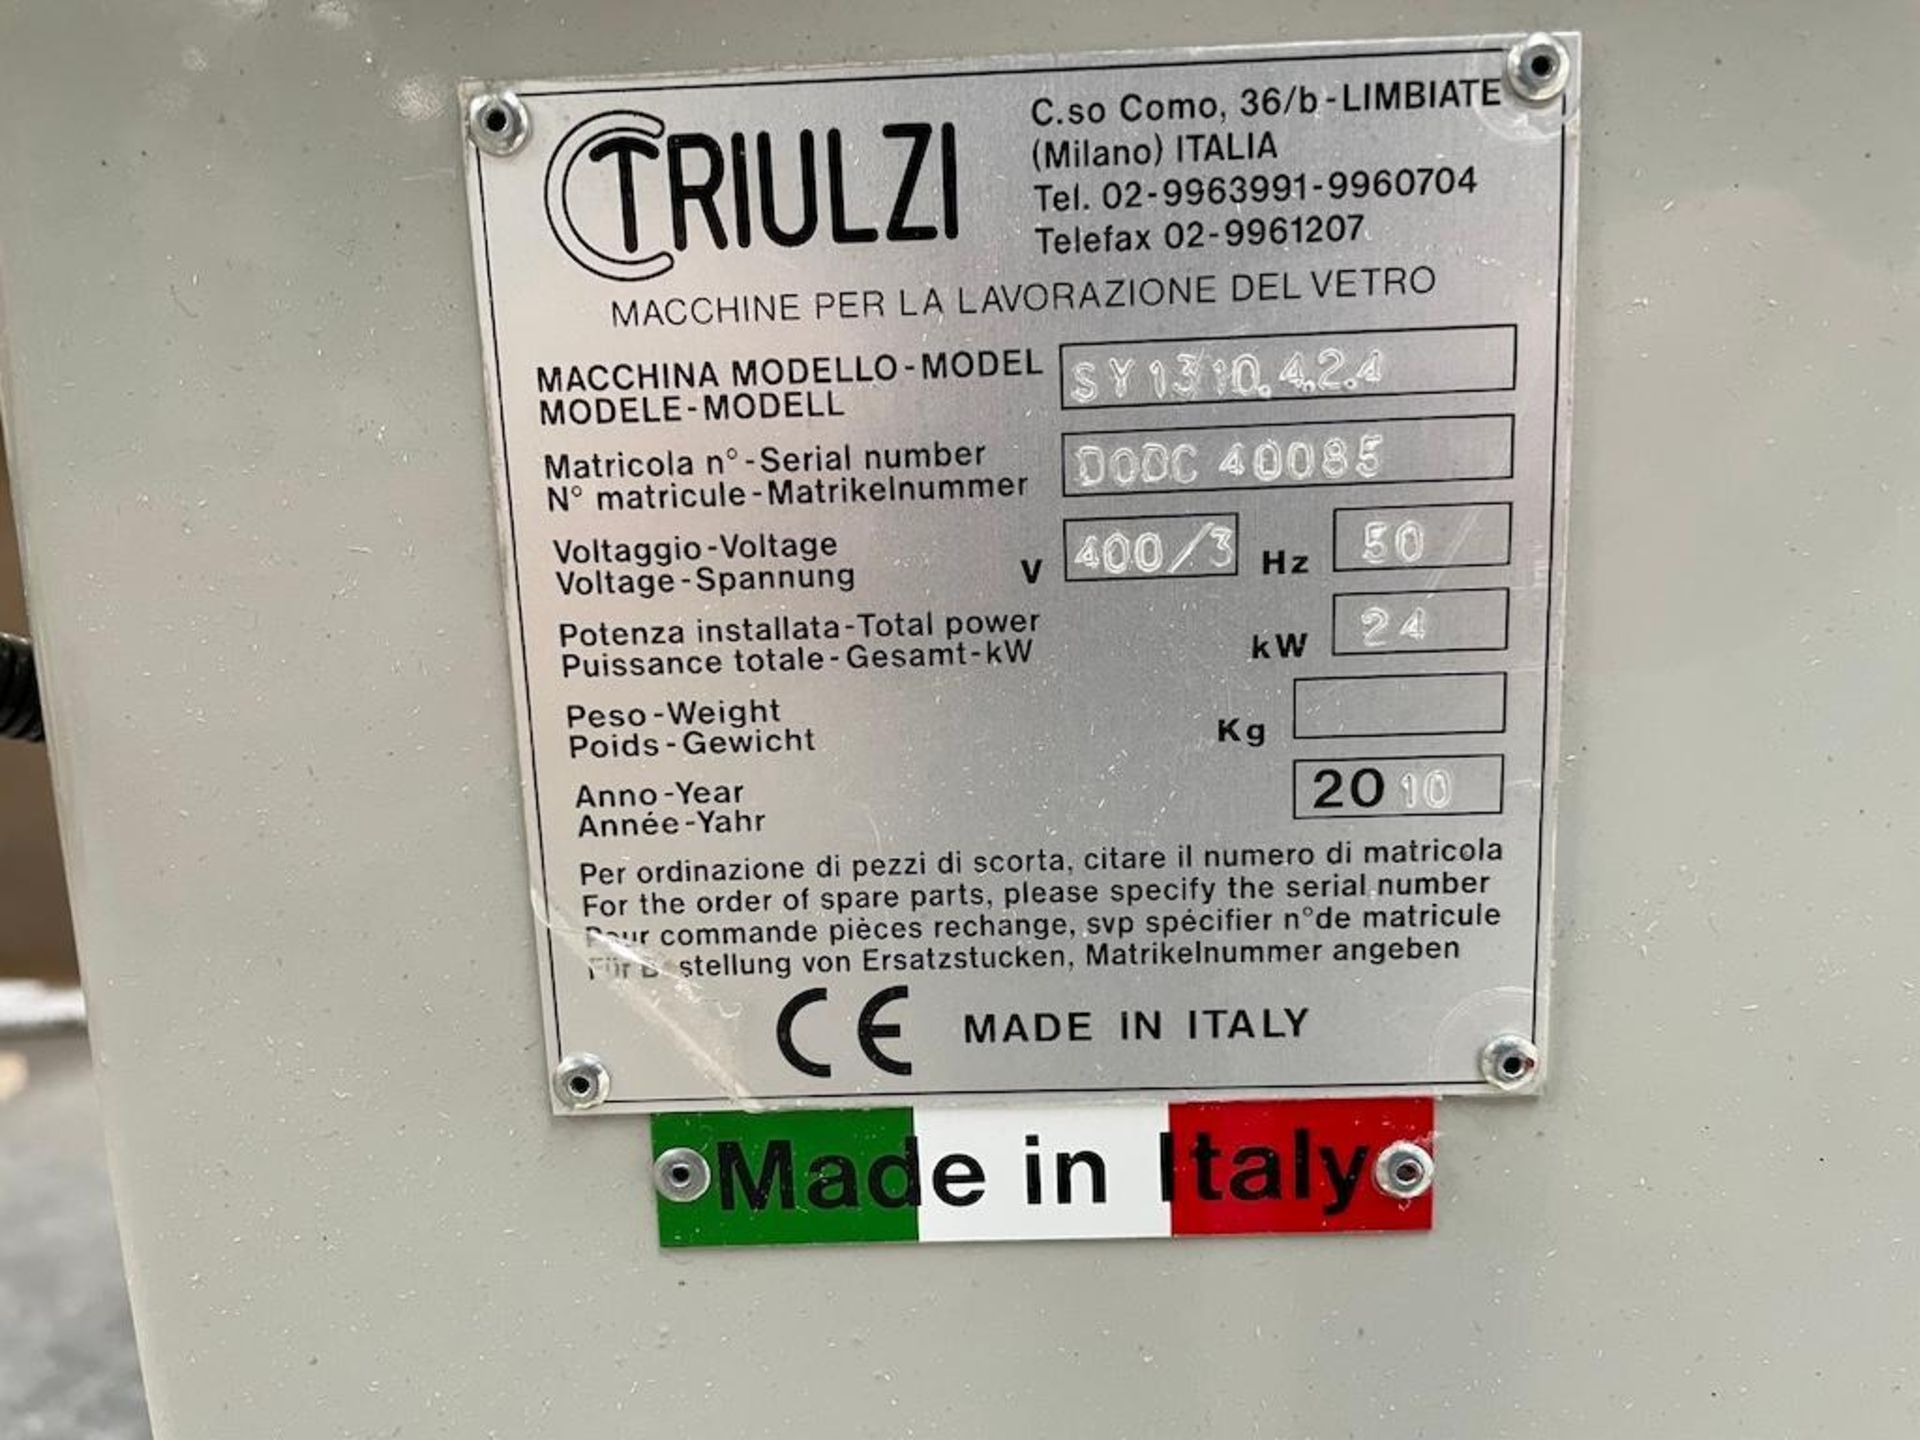 2010 TRIULZI PANEL WASHER MODEL SY1310.4.2.4, 52 IN W RUBBER INFEED ROLLERS, SN DODC 40085 [282, 289 - Image 5 of 10